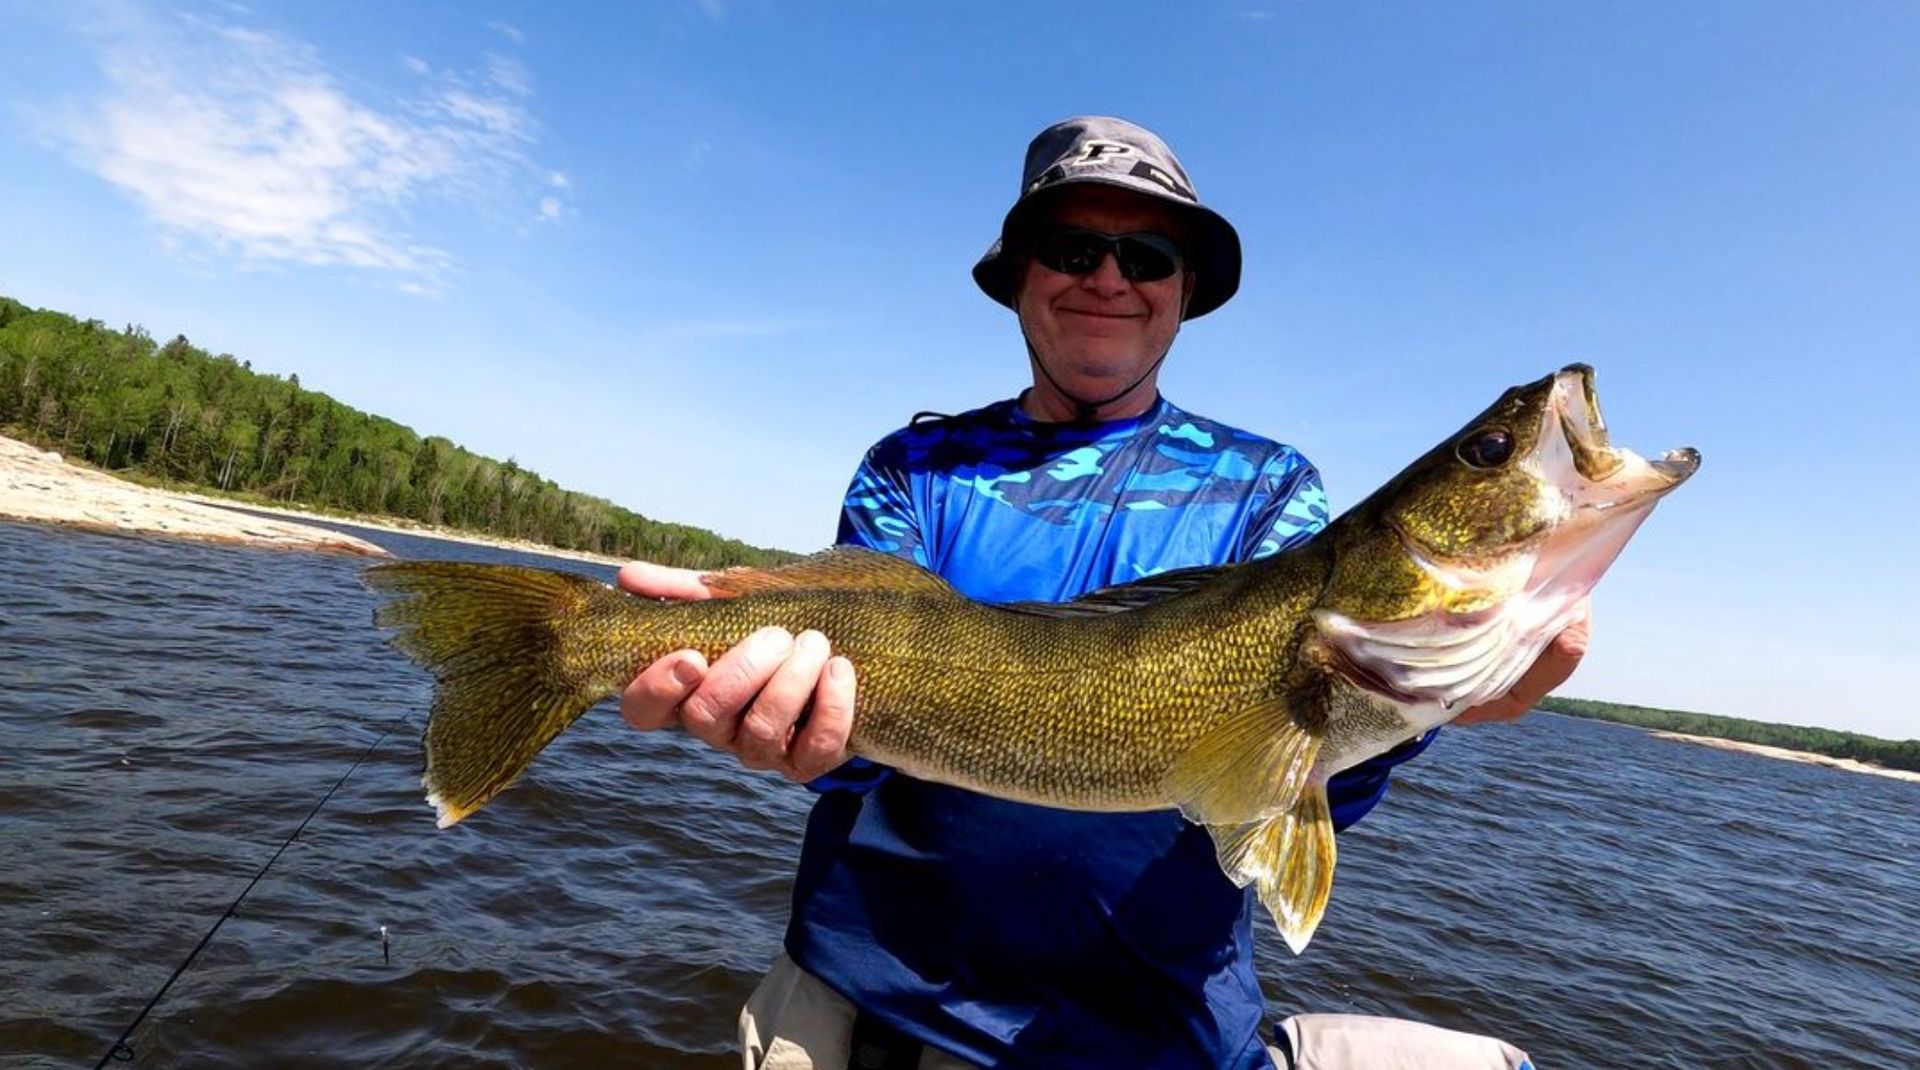 Paul holding a 26 inch walleye caught at Oak Lake Lodge, Ontario, Canada.